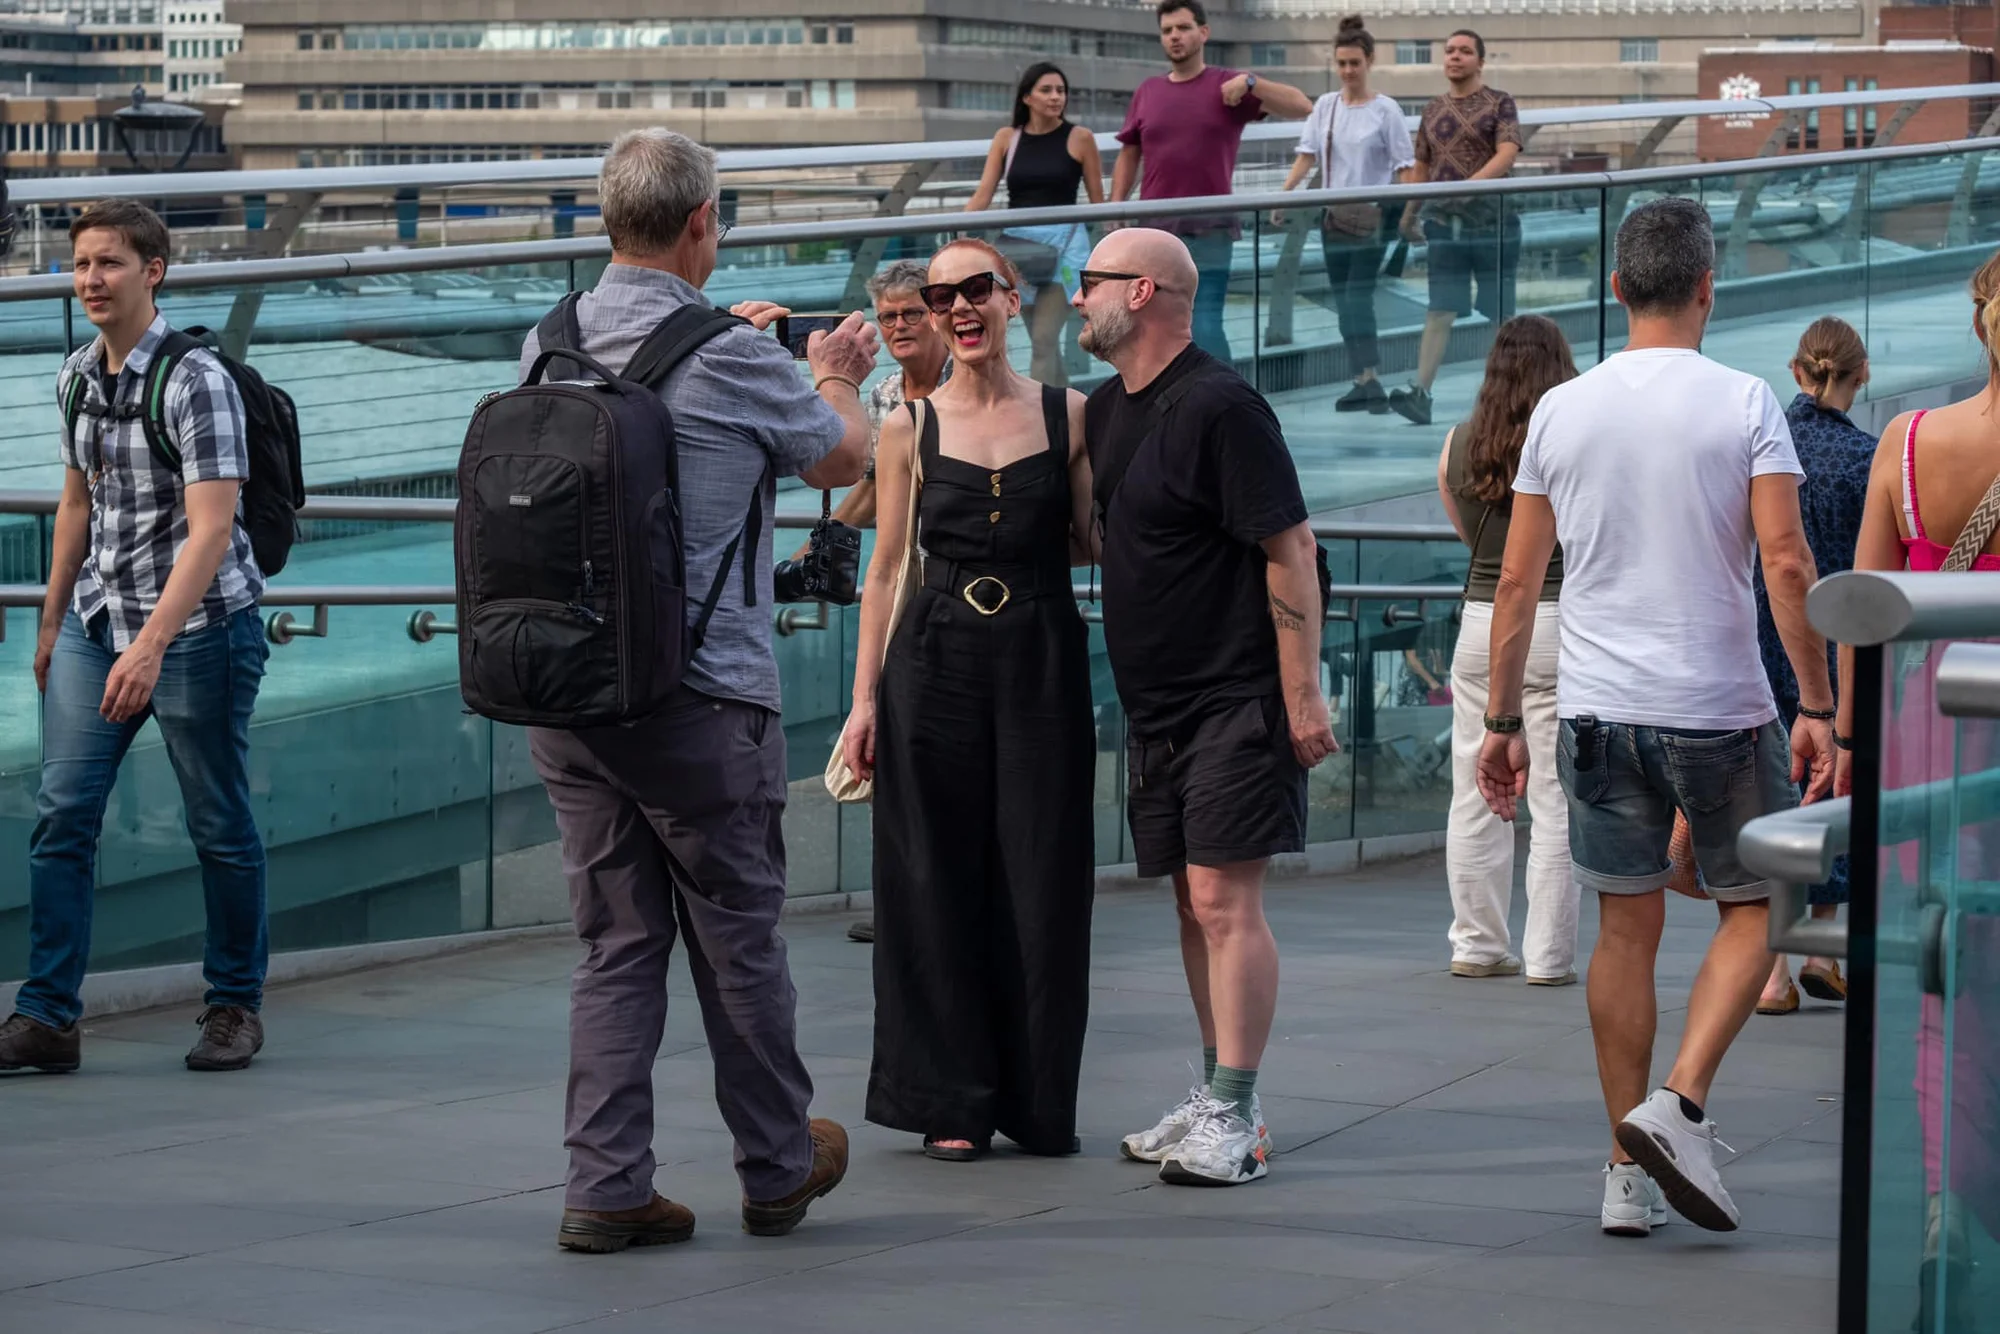 A photographer using a phone to take a photo of a man and woman wearing sunglasses on the Millennium Bridge in London